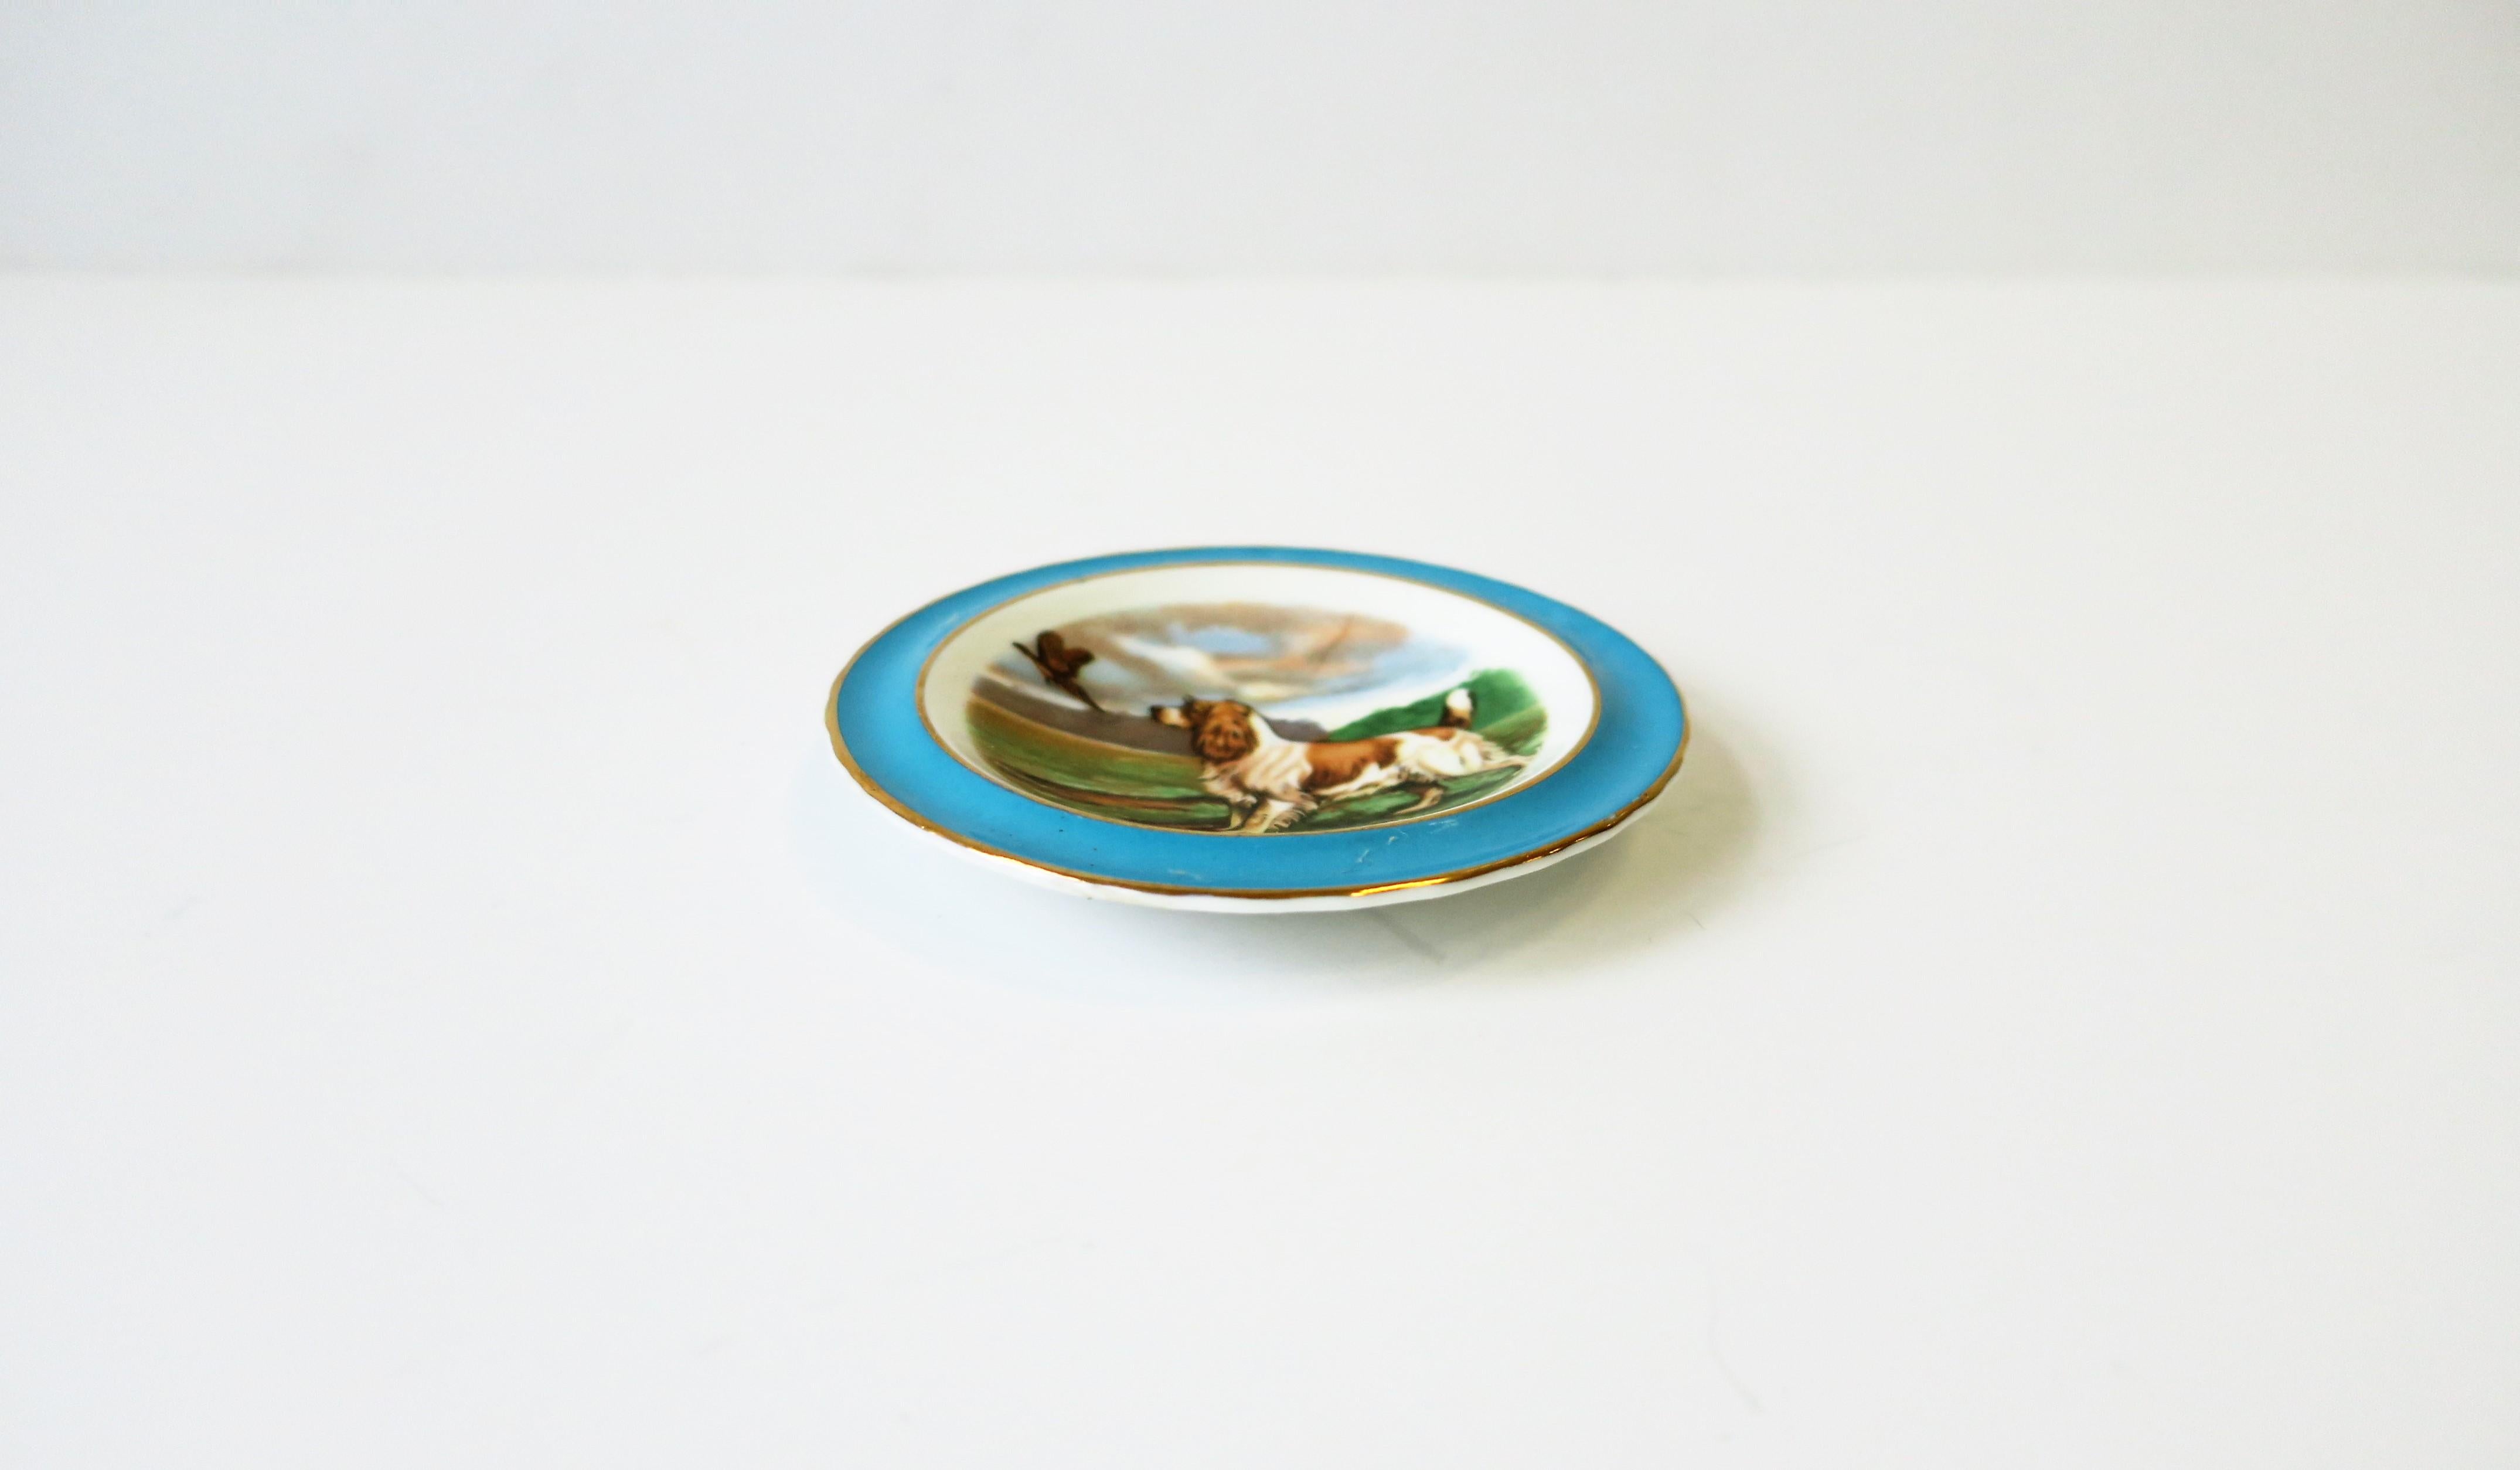 English Blue and White Porcelain Jewelry Dish with Spaniel Dog and Bird 4